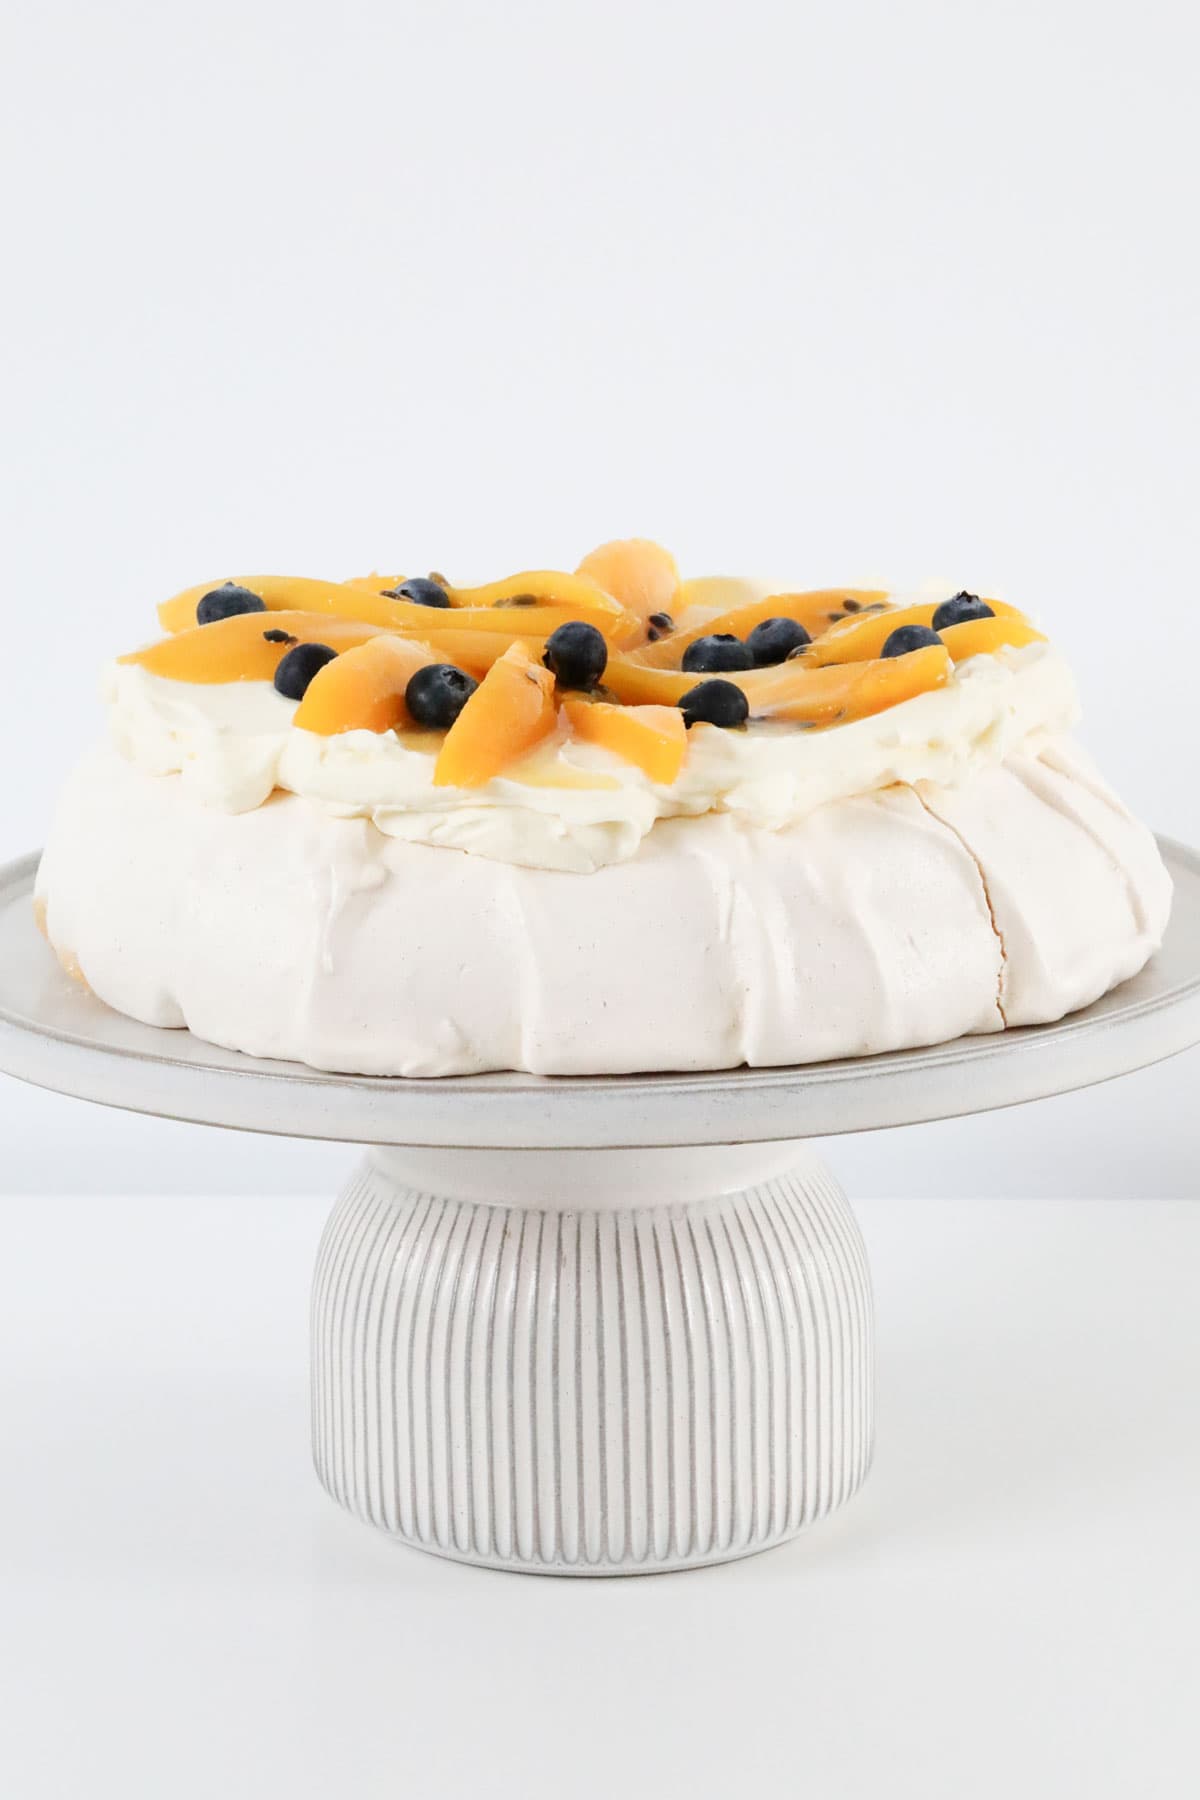 A pavlova decorated with mango slices, served on a cake stand.